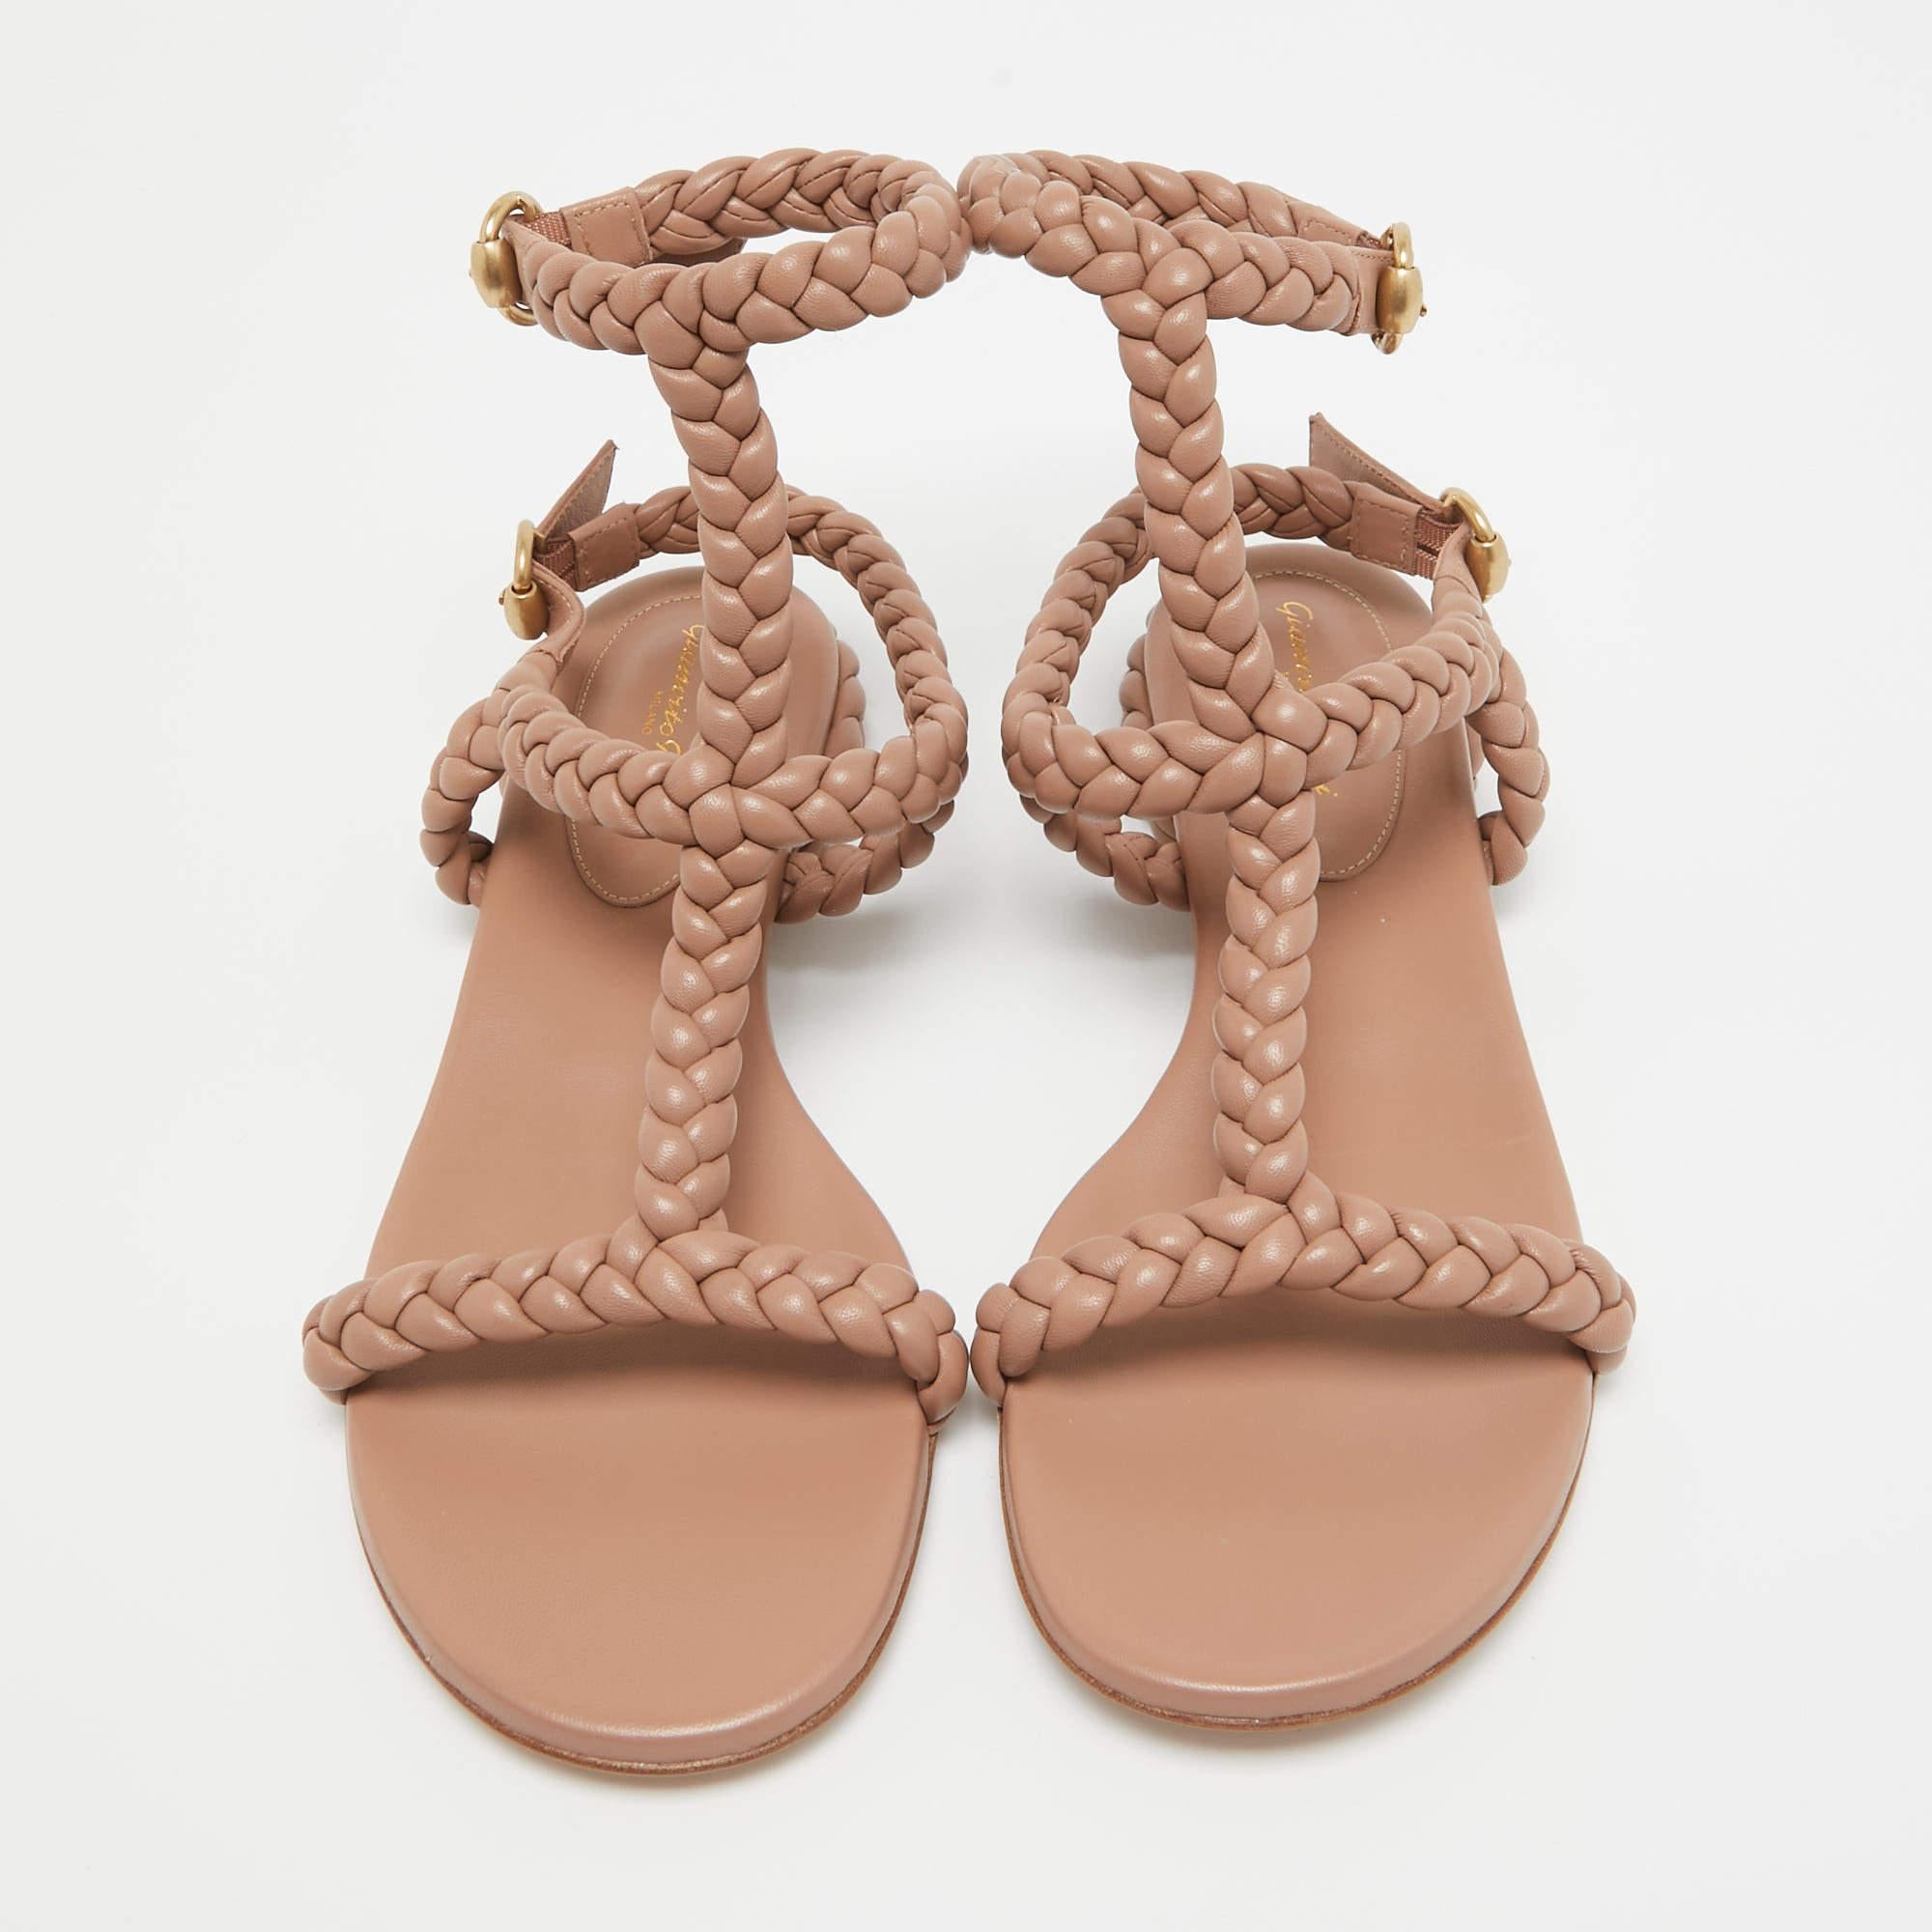 These sandals will offer you both luxury and comfort. Made from quality materials, they come in a versatile shade and are equipped with comfortable insoles.

Includes: Original Box, Info Card

